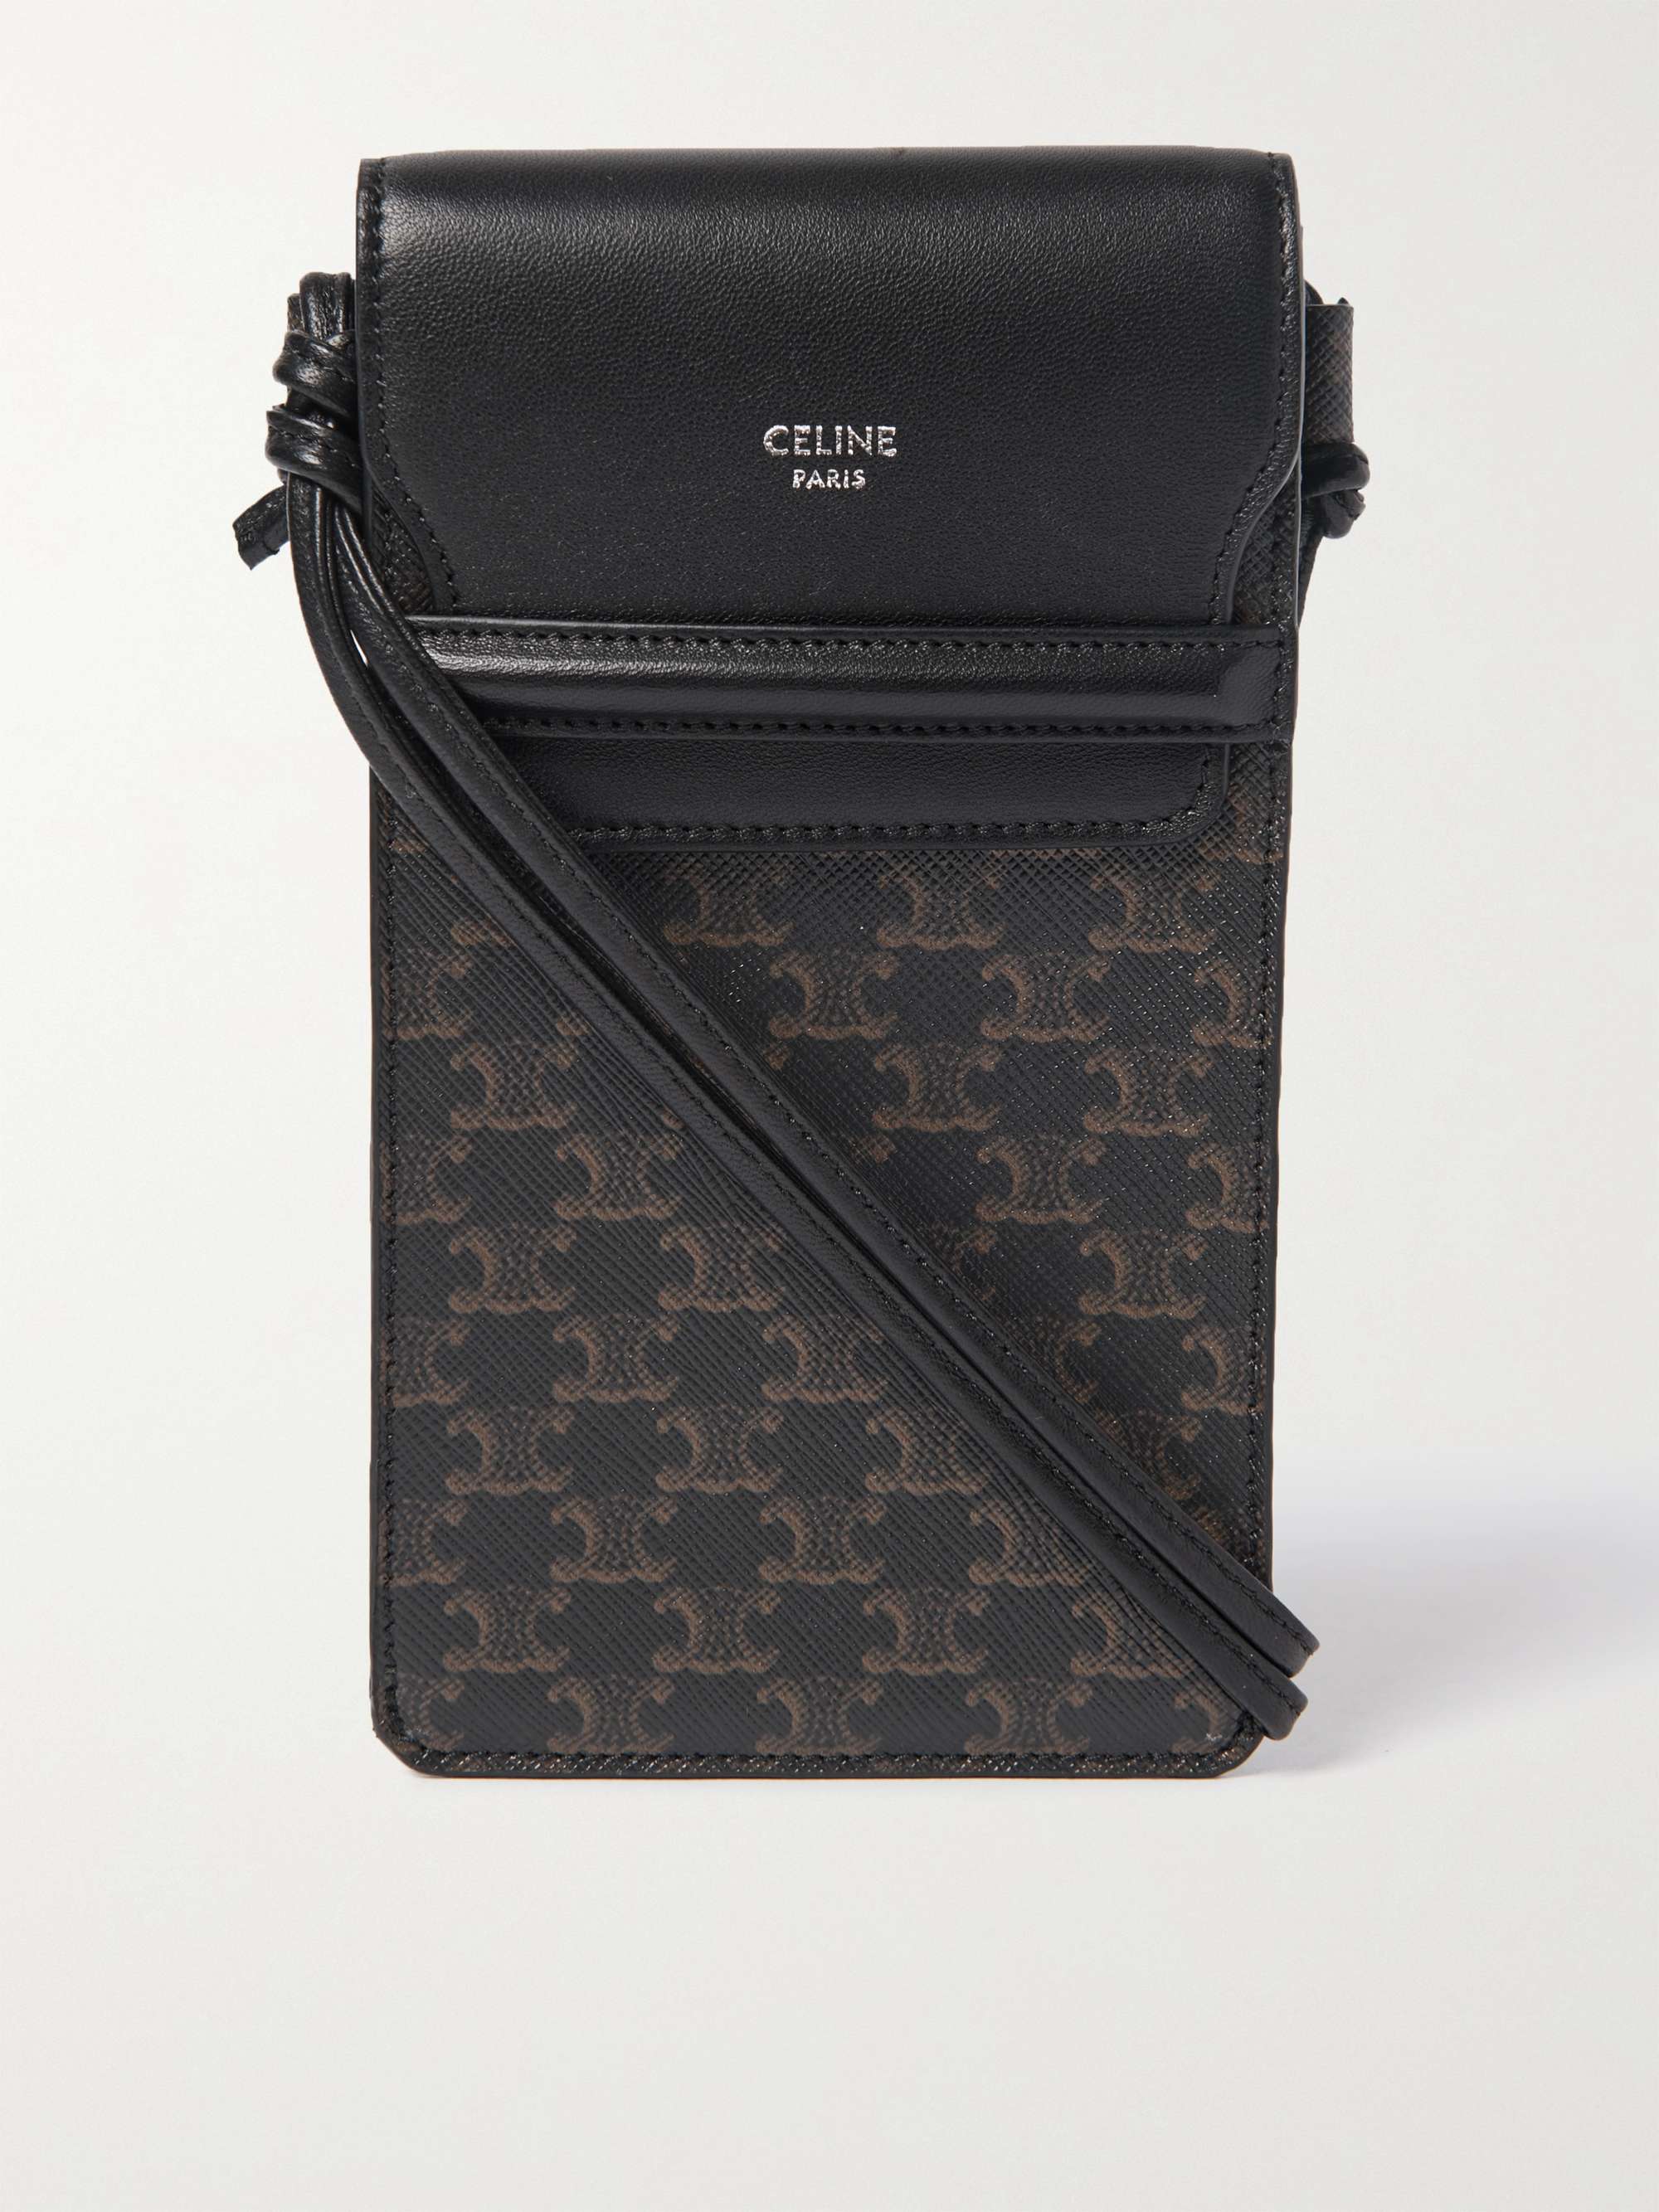 CELINE HOMME Triomphe Leather-Trimmed Logo-Print Coated-Canvas Phone Pouch